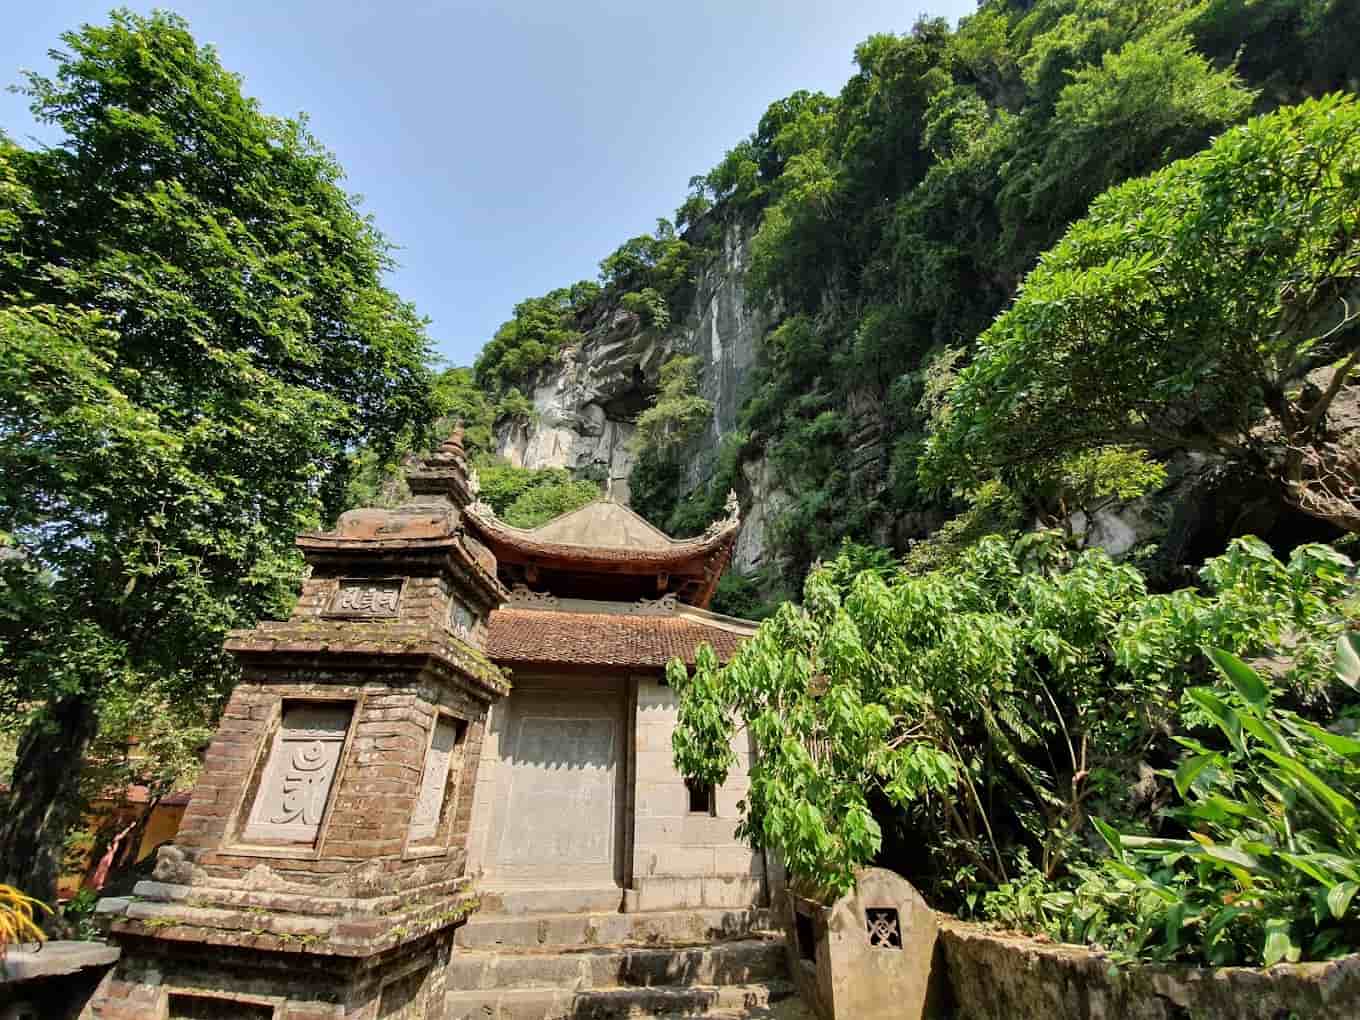 Tam Coc – Bich Dong: A Quick Guide